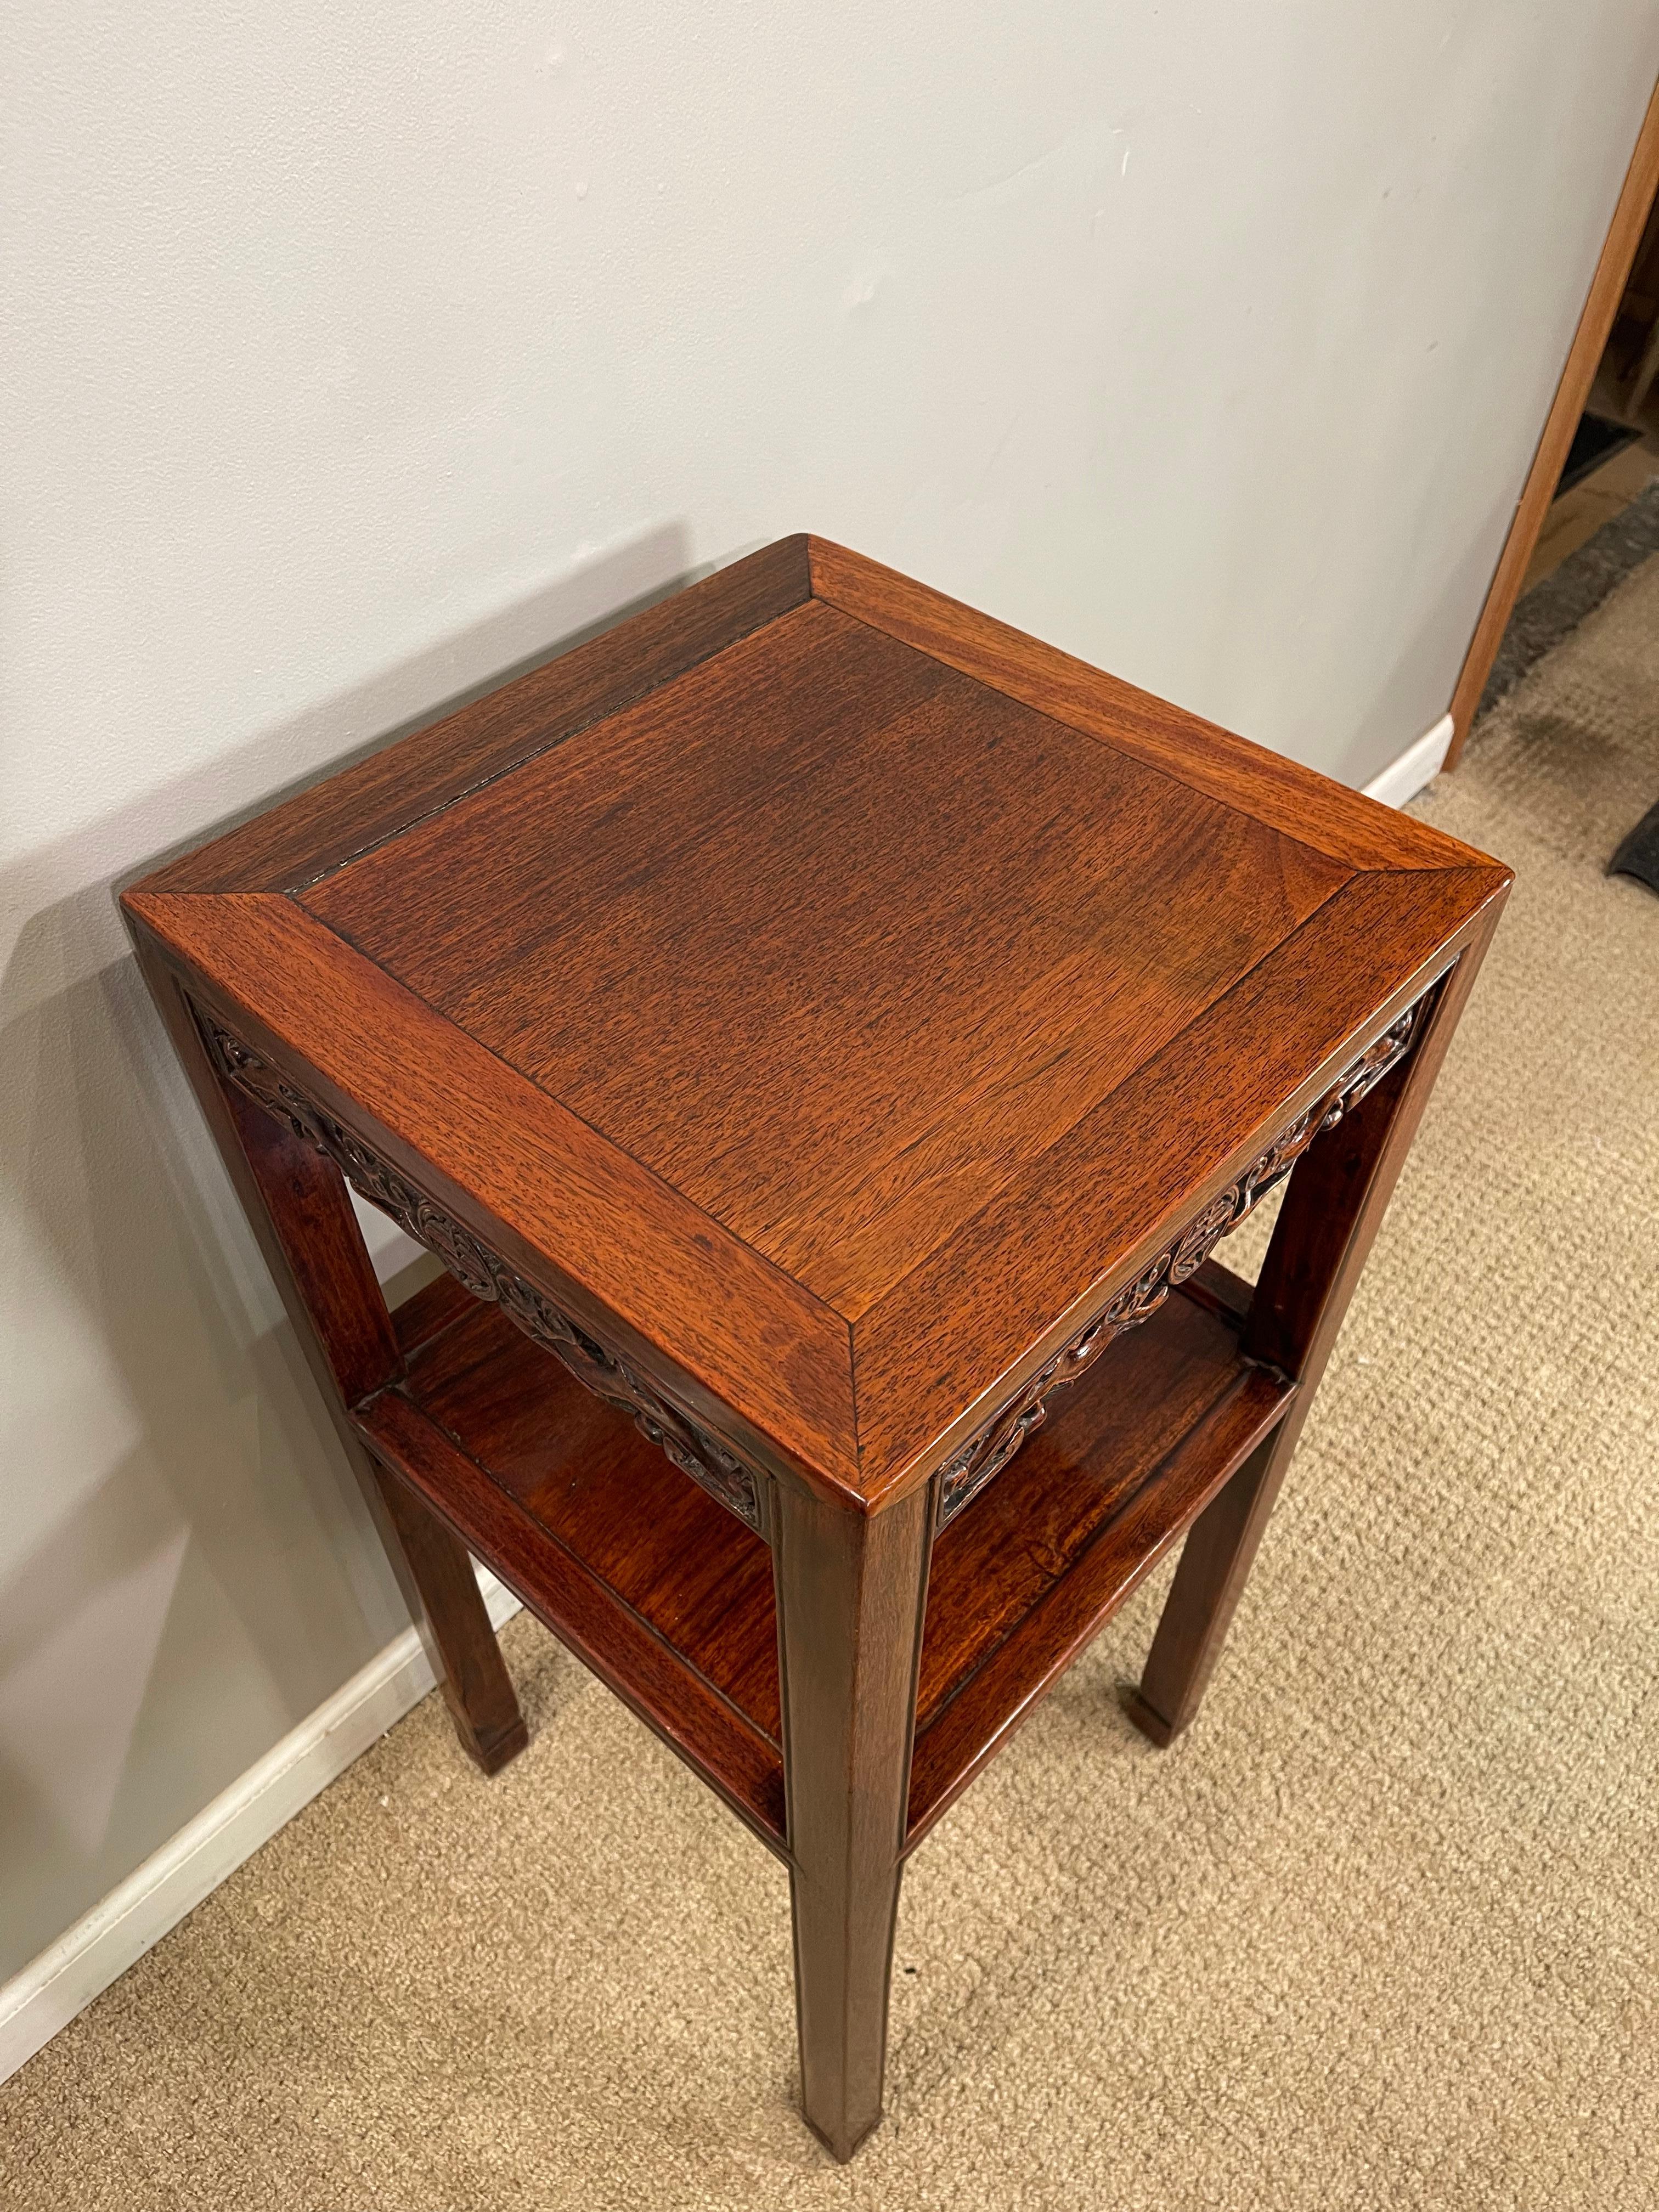 Chinese Hardwood 'Hungmu' Tea Table, Late 19th Century / Early 20th Century For Sale 8